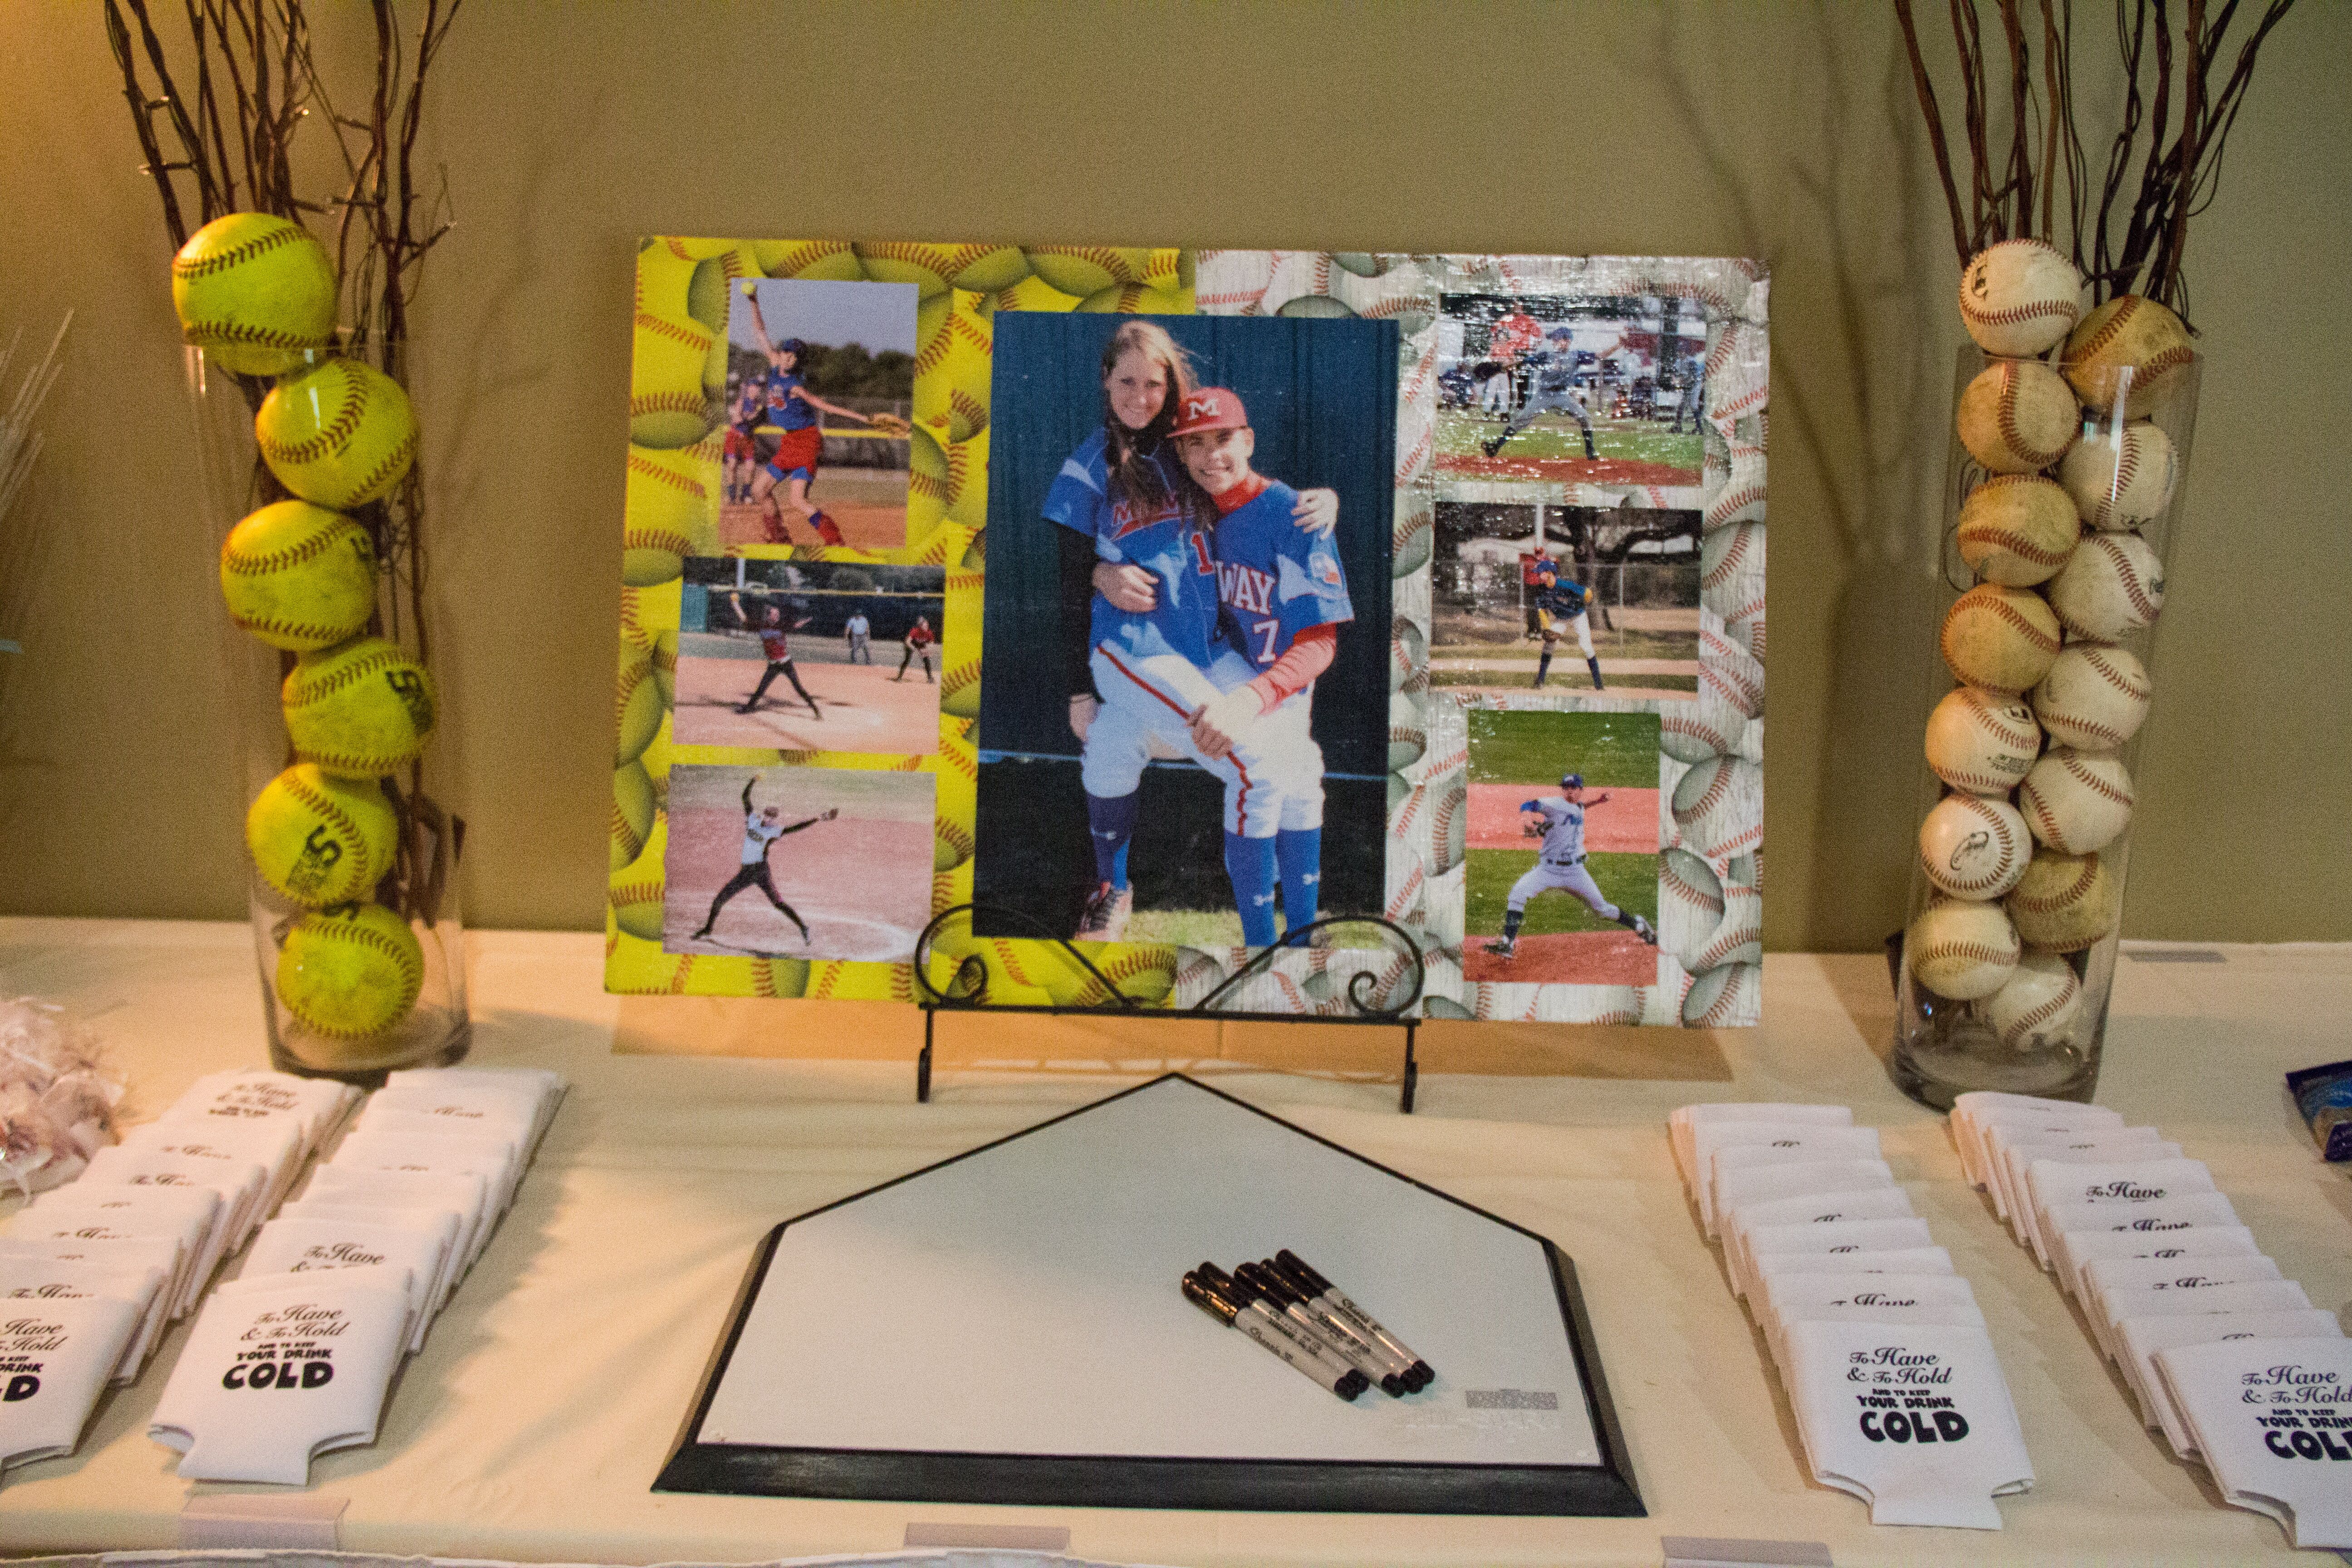 Baseball-Themed Home Plate Guest Book